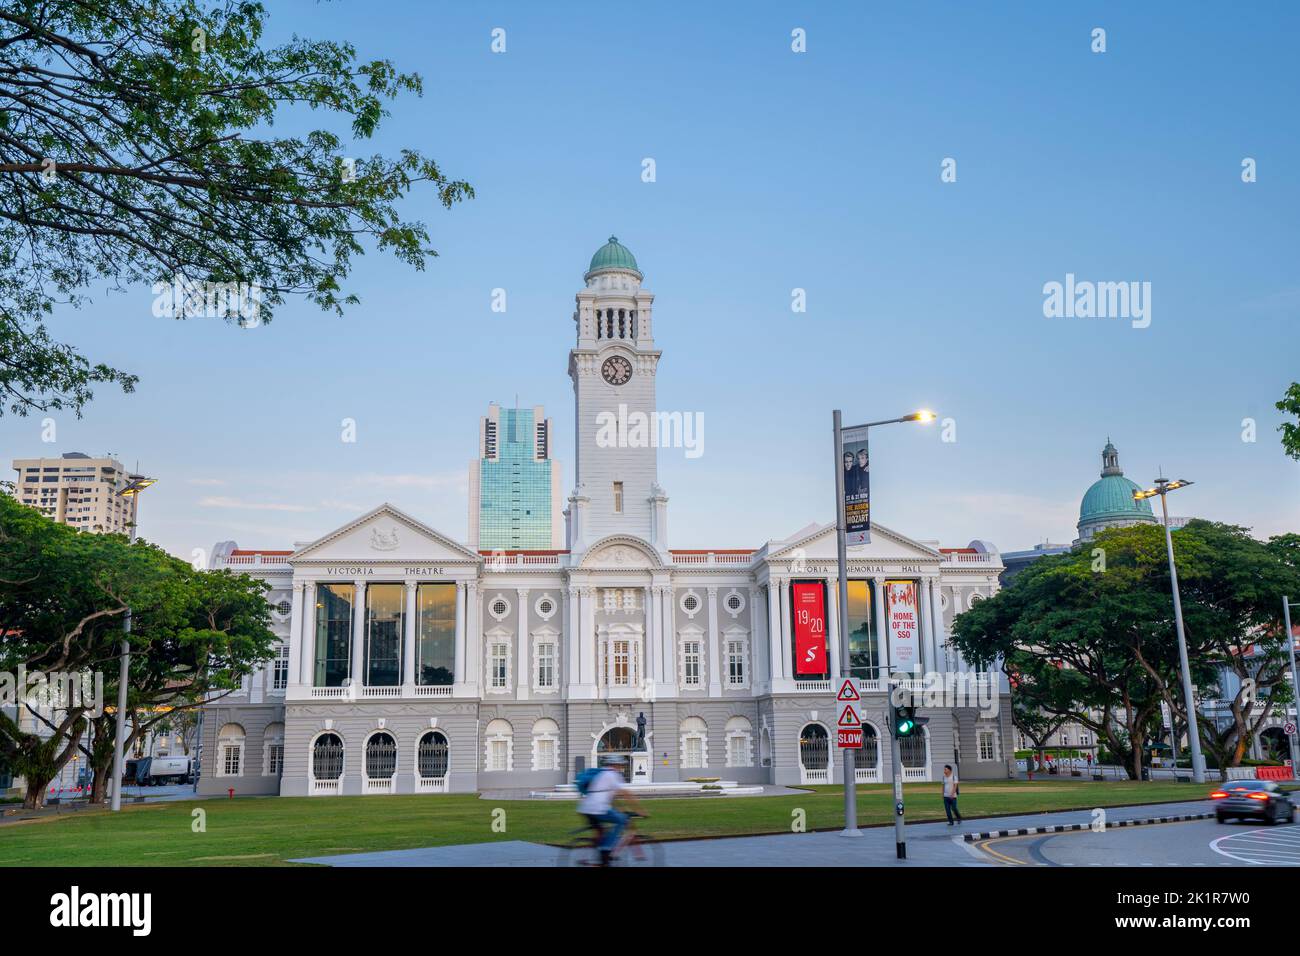 Victoria Theatre and Concert Hall surrounded by Empress Lawn on banks of Singapore River. Singapore Stock Photo